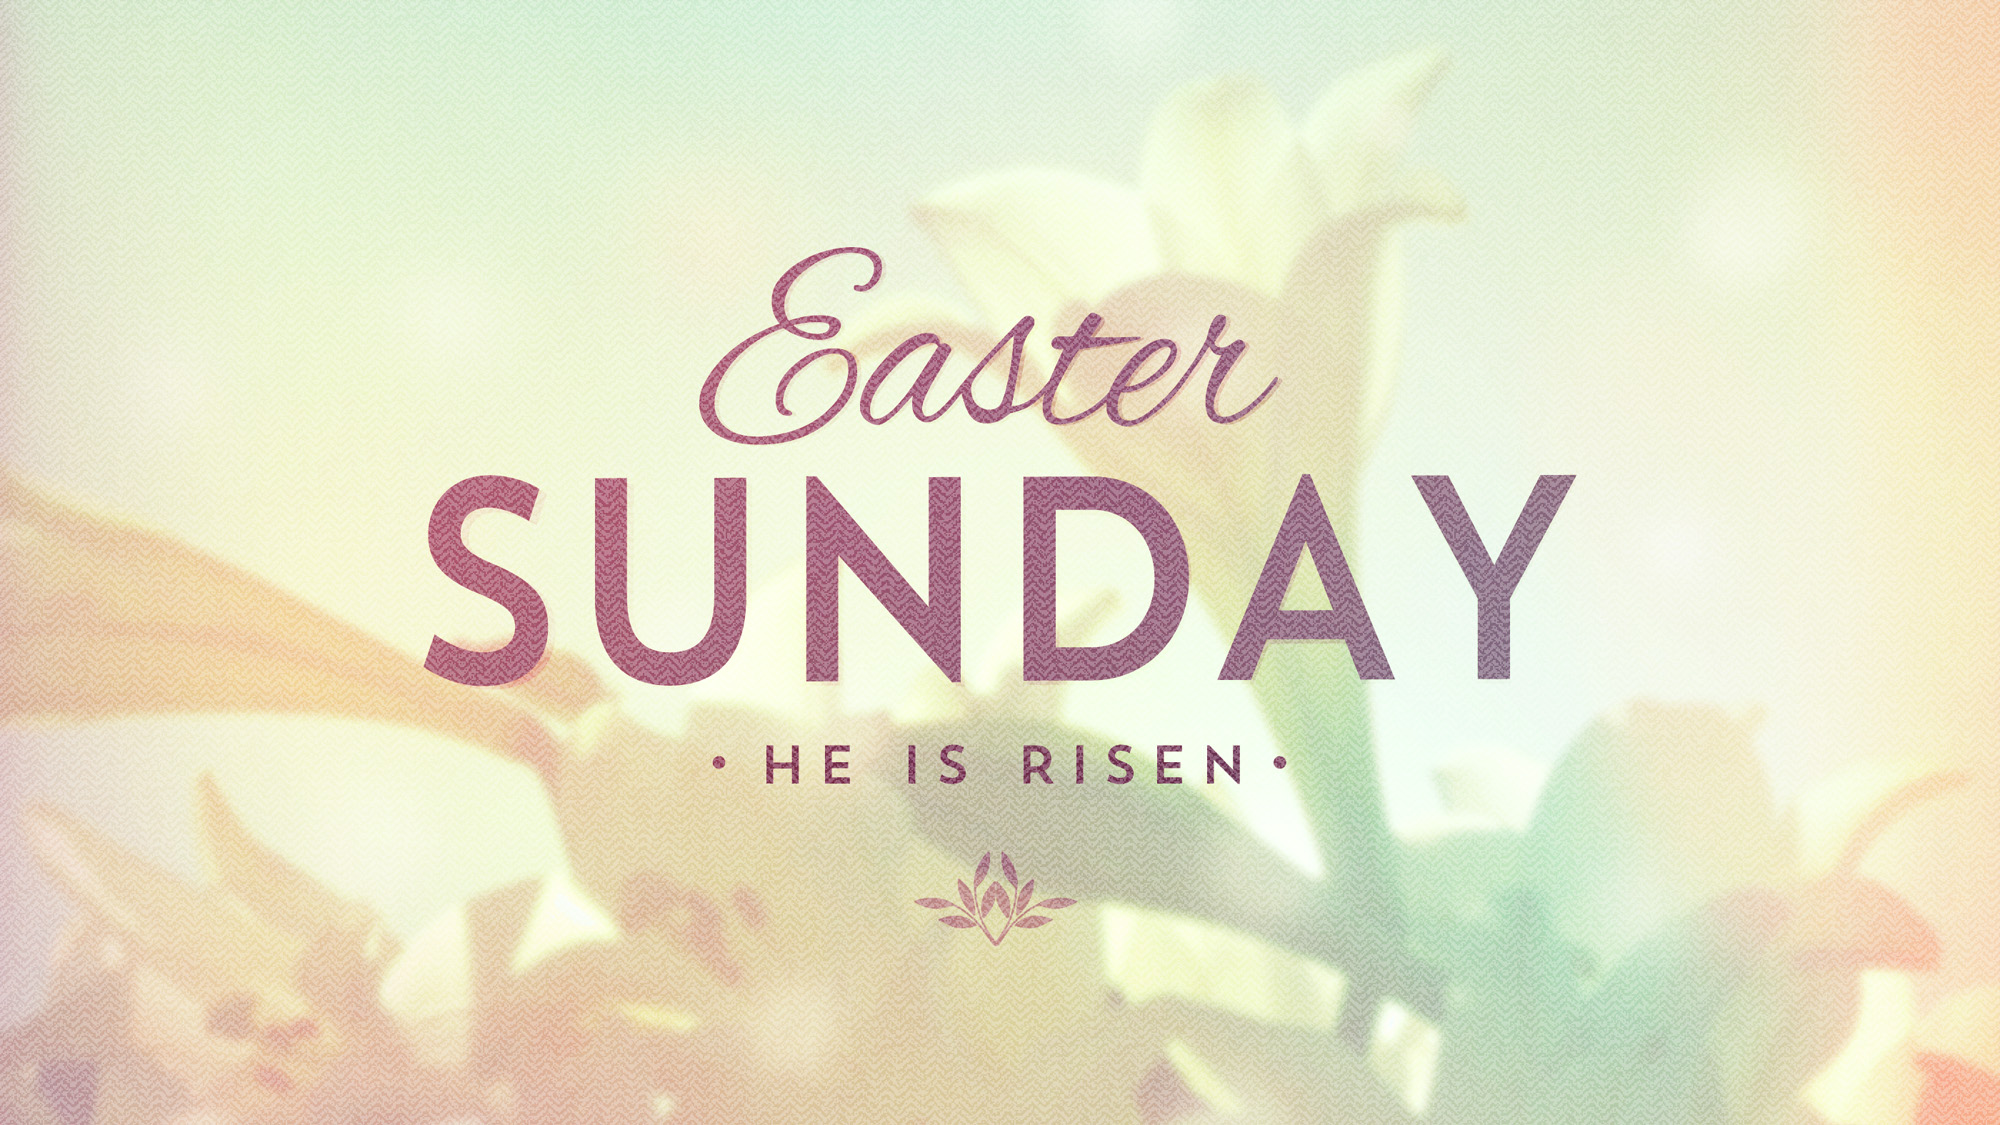 Easter Sunday Quotes, Images, Easter Bunny Images 2017